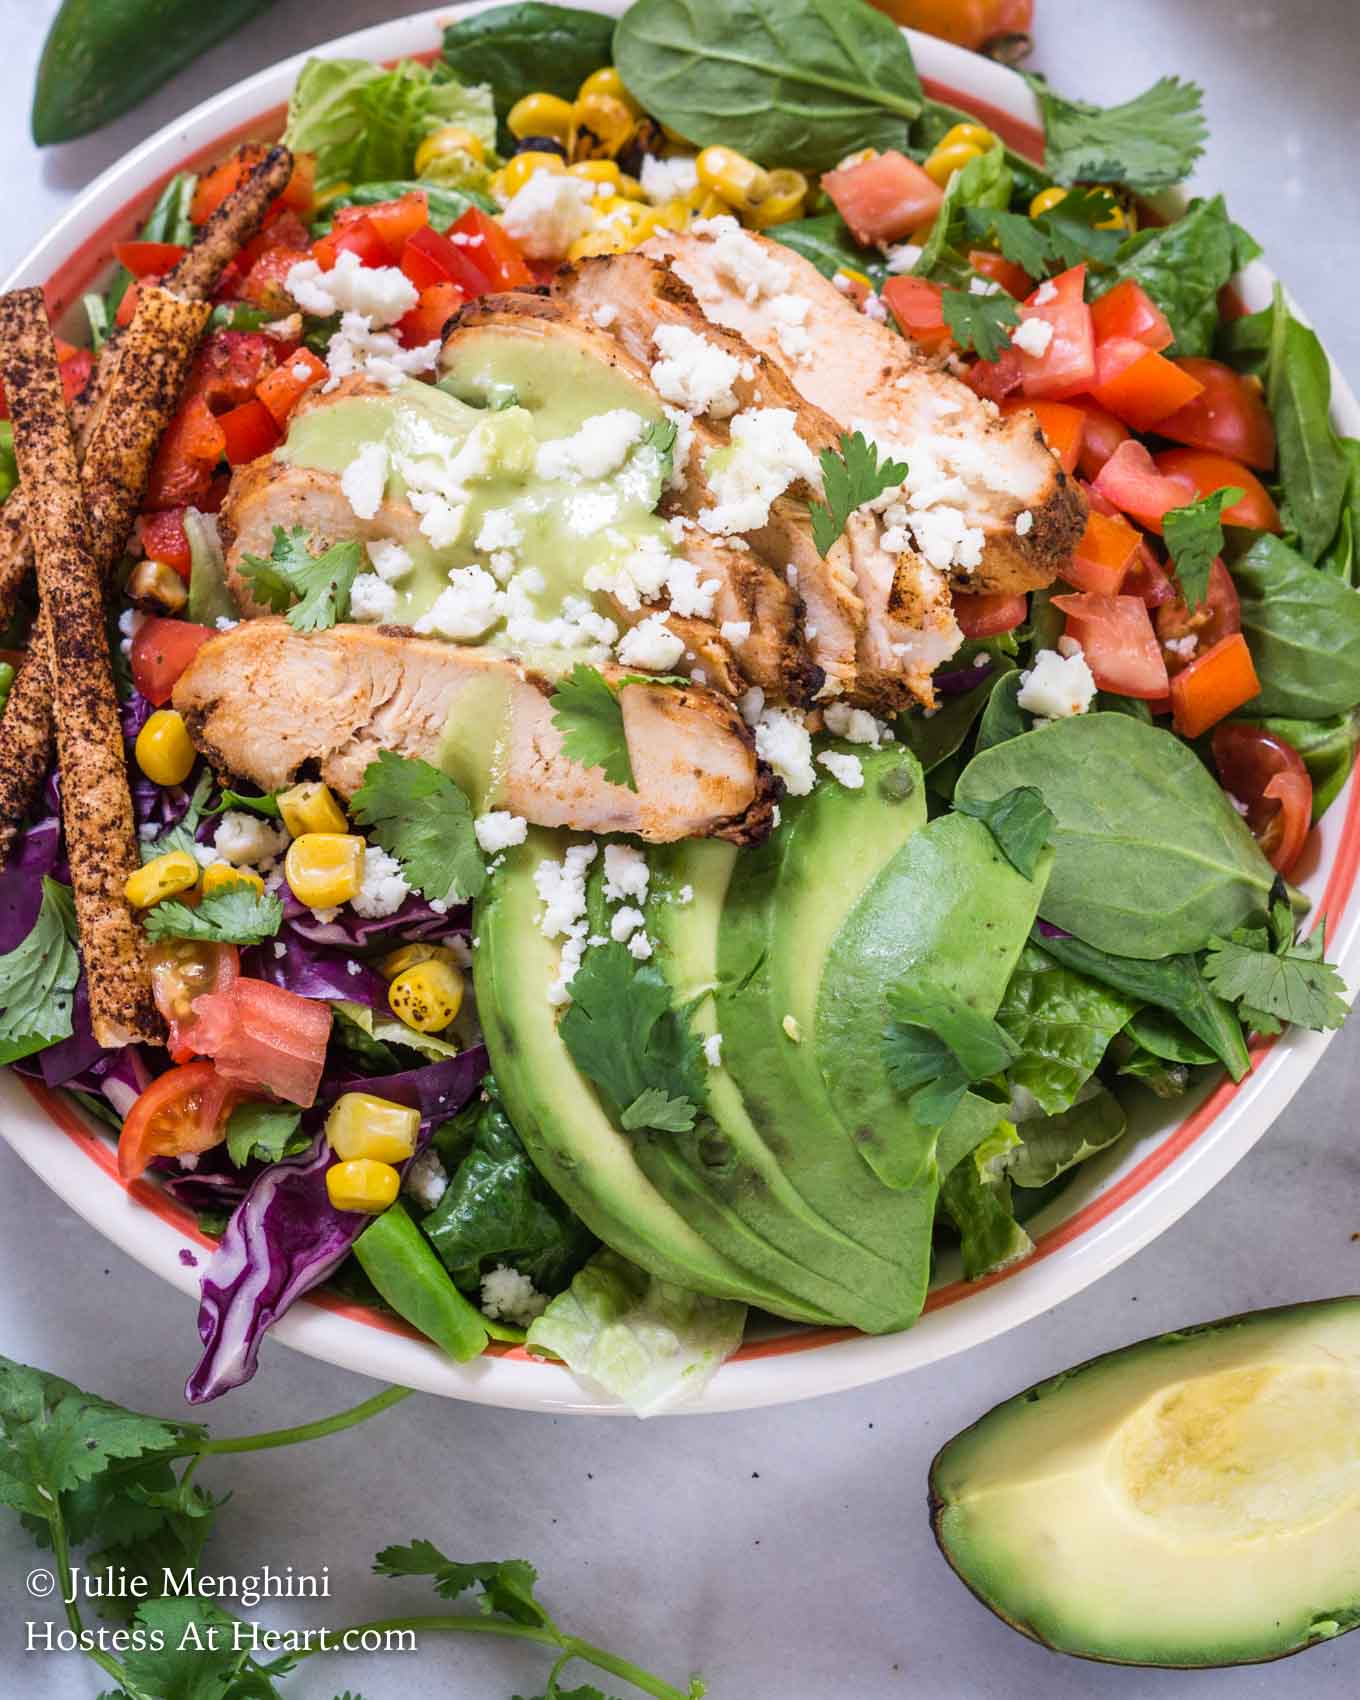 Top-down view of a green salad topped with slices of chipotle grilled chicken, sliced avocado, shredded purple cabbage, diced tomato, grilled corn, and tortilla straws and then garnished with fresh cilantro. A cut avocado sits in the foreground.